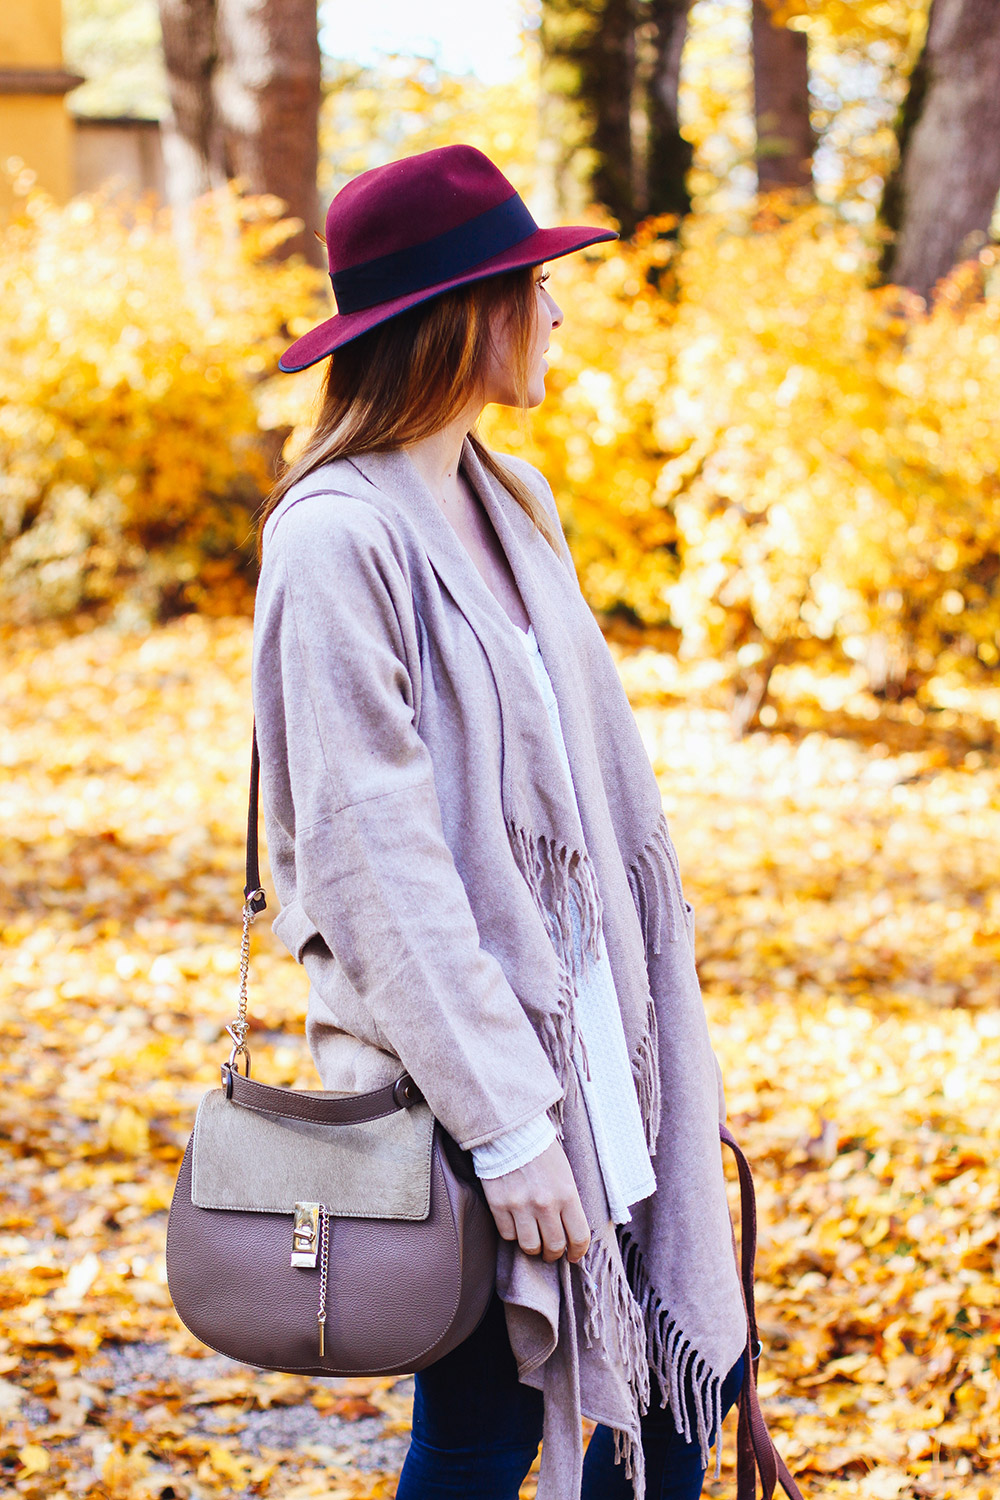 who is mocca, modeblog, fashionblog, herbstoutfit inspiration, fransenjacke outfit, fransenjacke kombinieren, frenchie, schloss ambras, innsbruck, streetstyle, river island pumps, fedora christy madison, chloe dupe lookalike, whoismocca.com